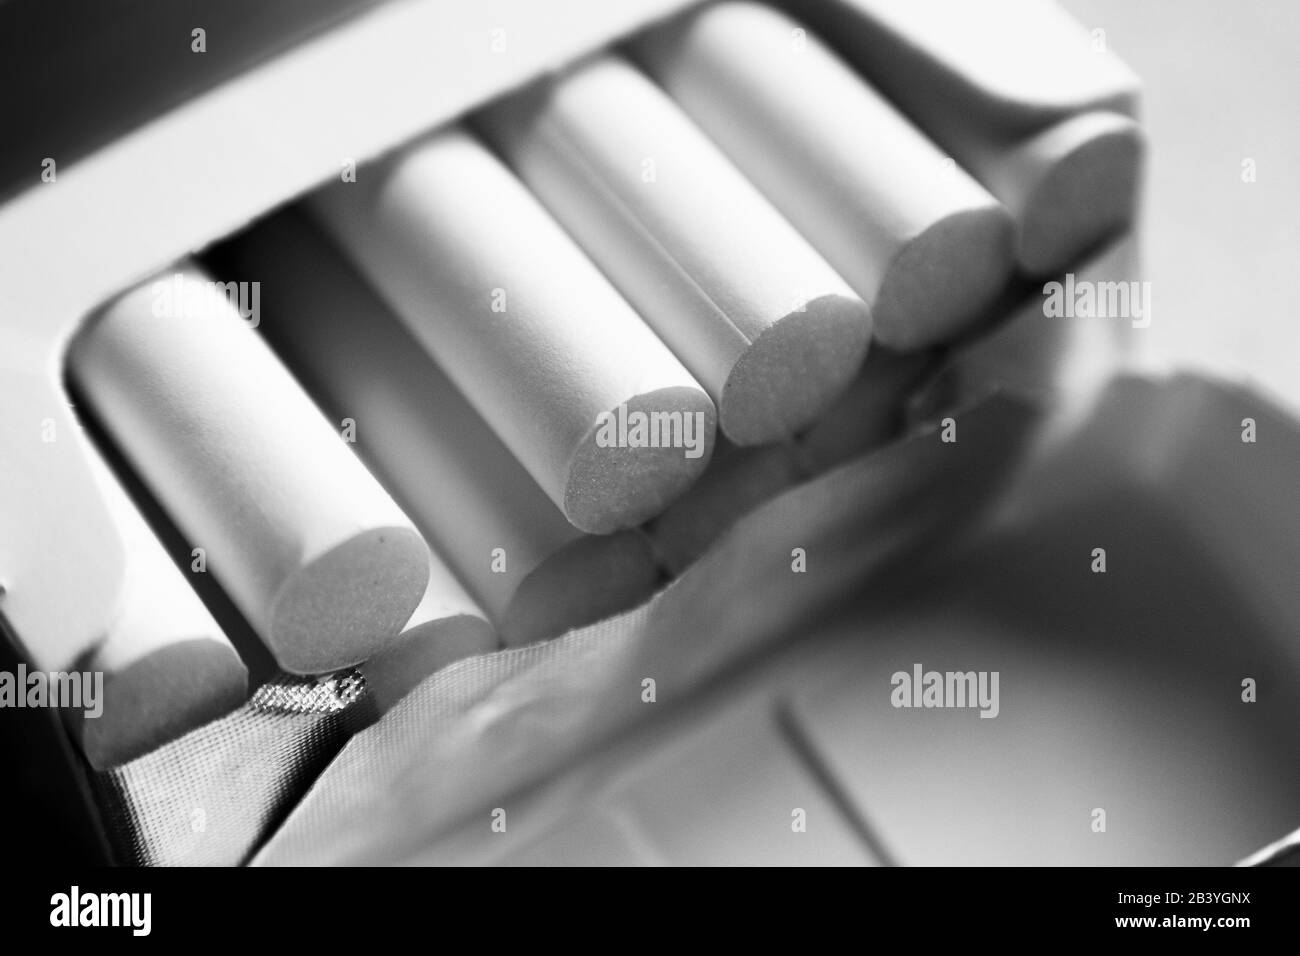 Close up row of cigarettes inside a pack. Stock Photo